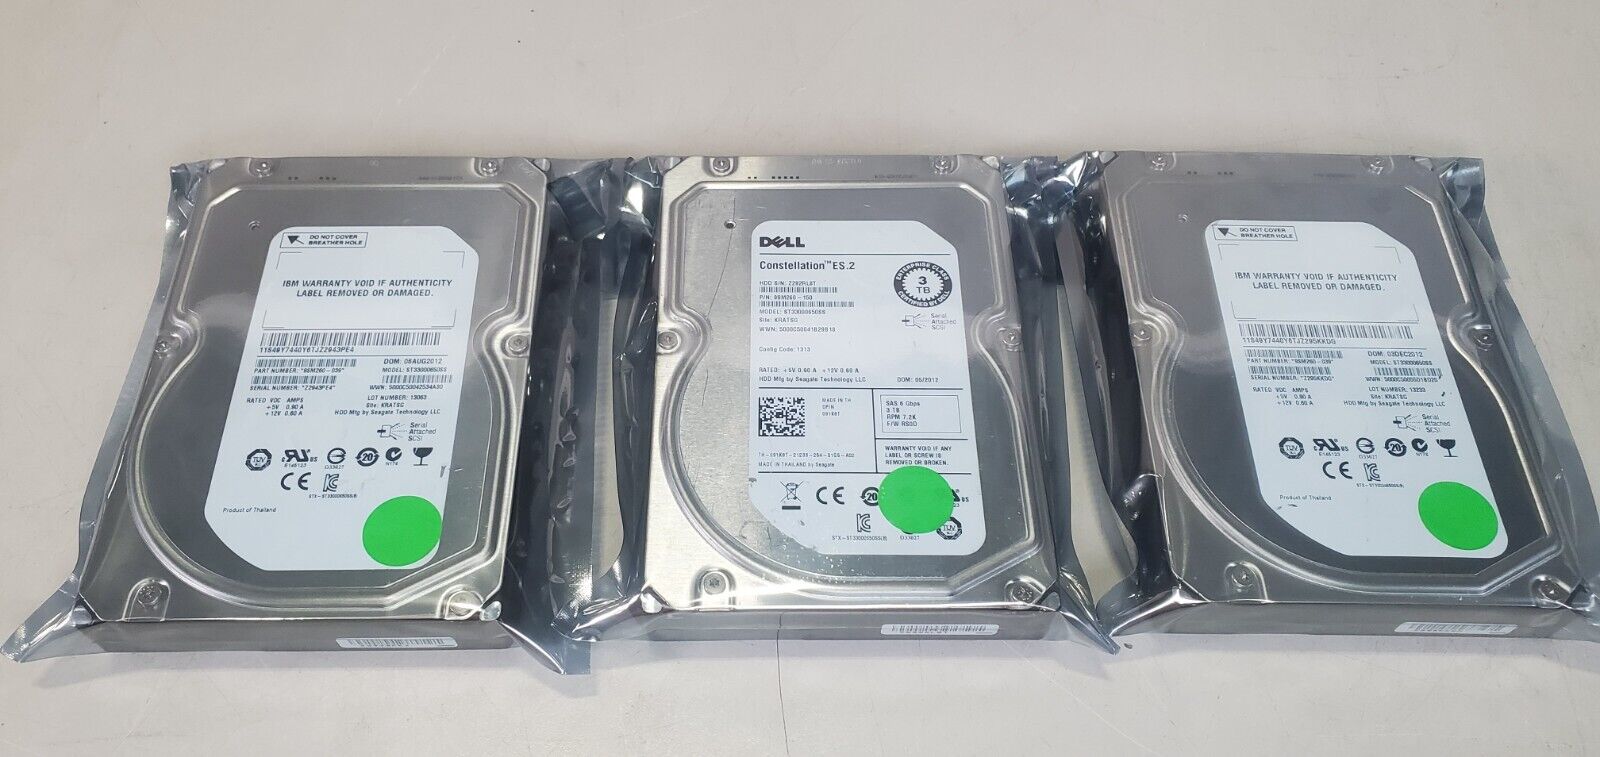 (Lot of 3) Seagate/Dell ST33000650SS Constellation ES.2 3TB SAS 6G 64MB 3.5